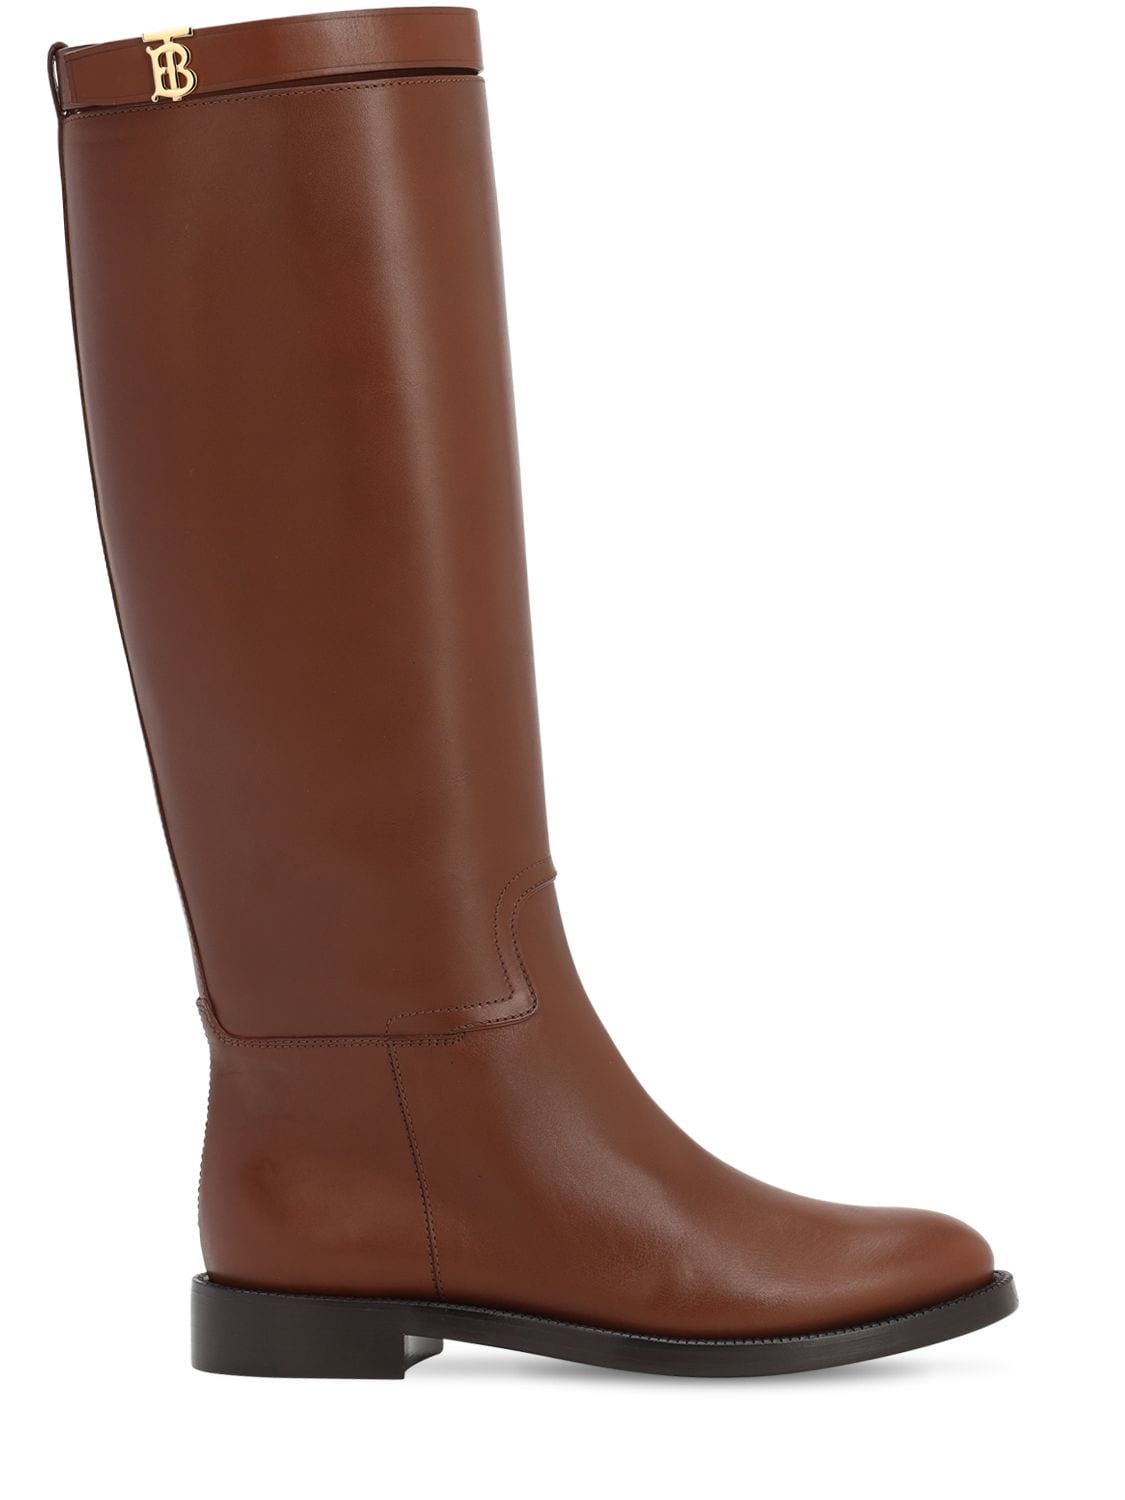 30mm redgrave leather tall boots 